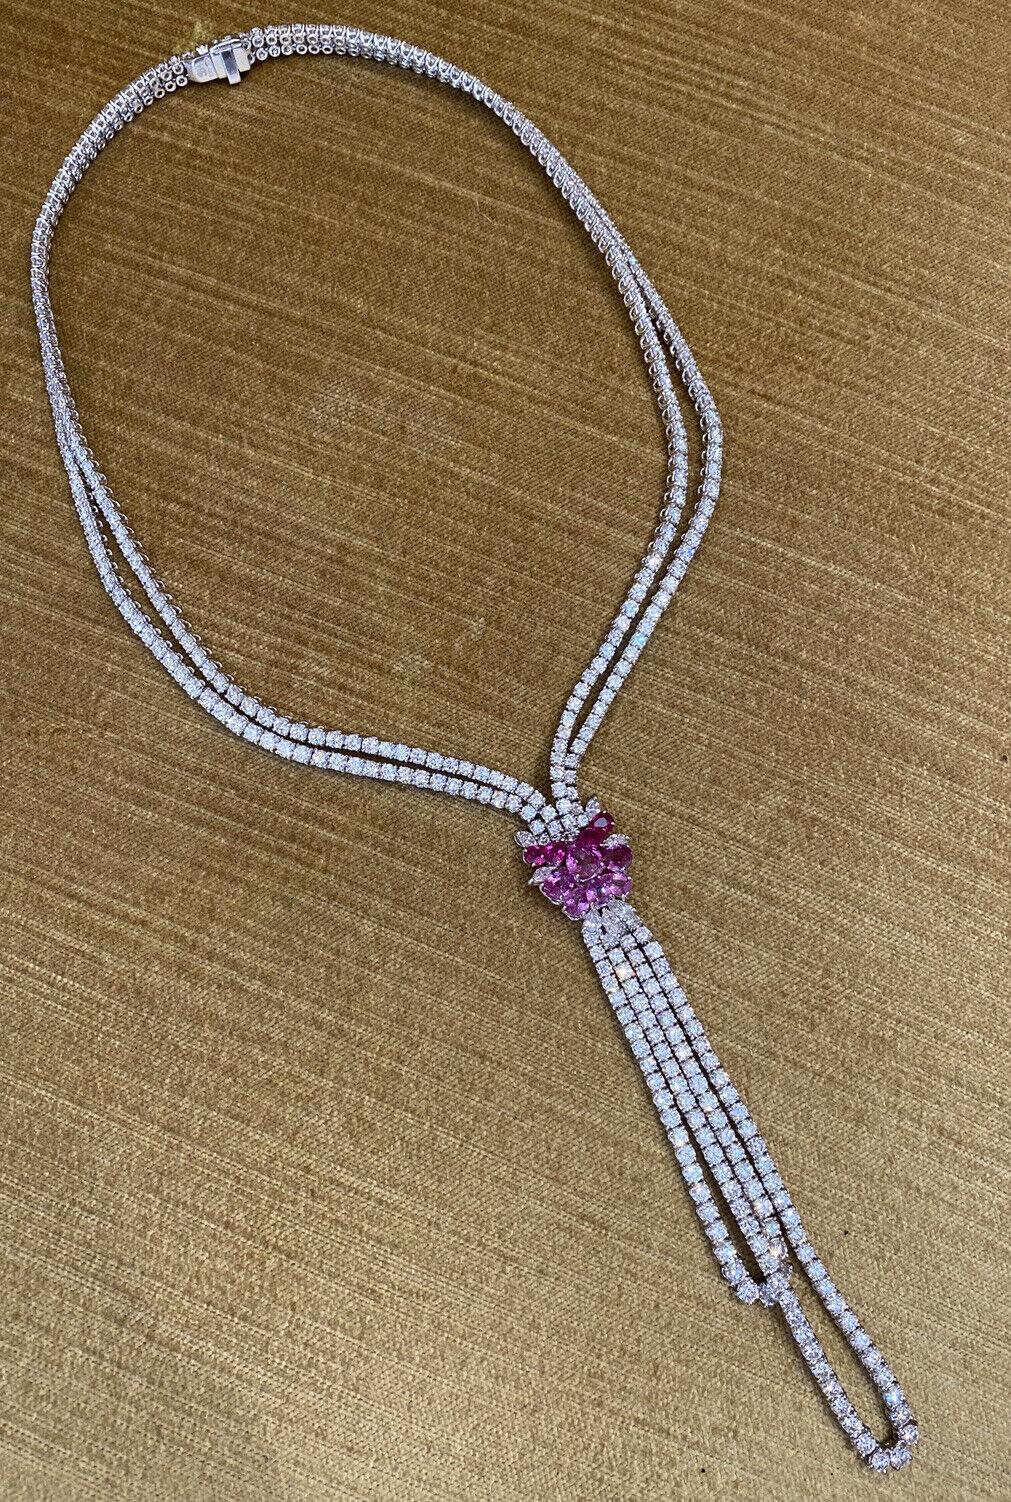 Stefan Hafner Y Diamond Necklace with Pink Sapphires in 18k White Gold For Sale 2